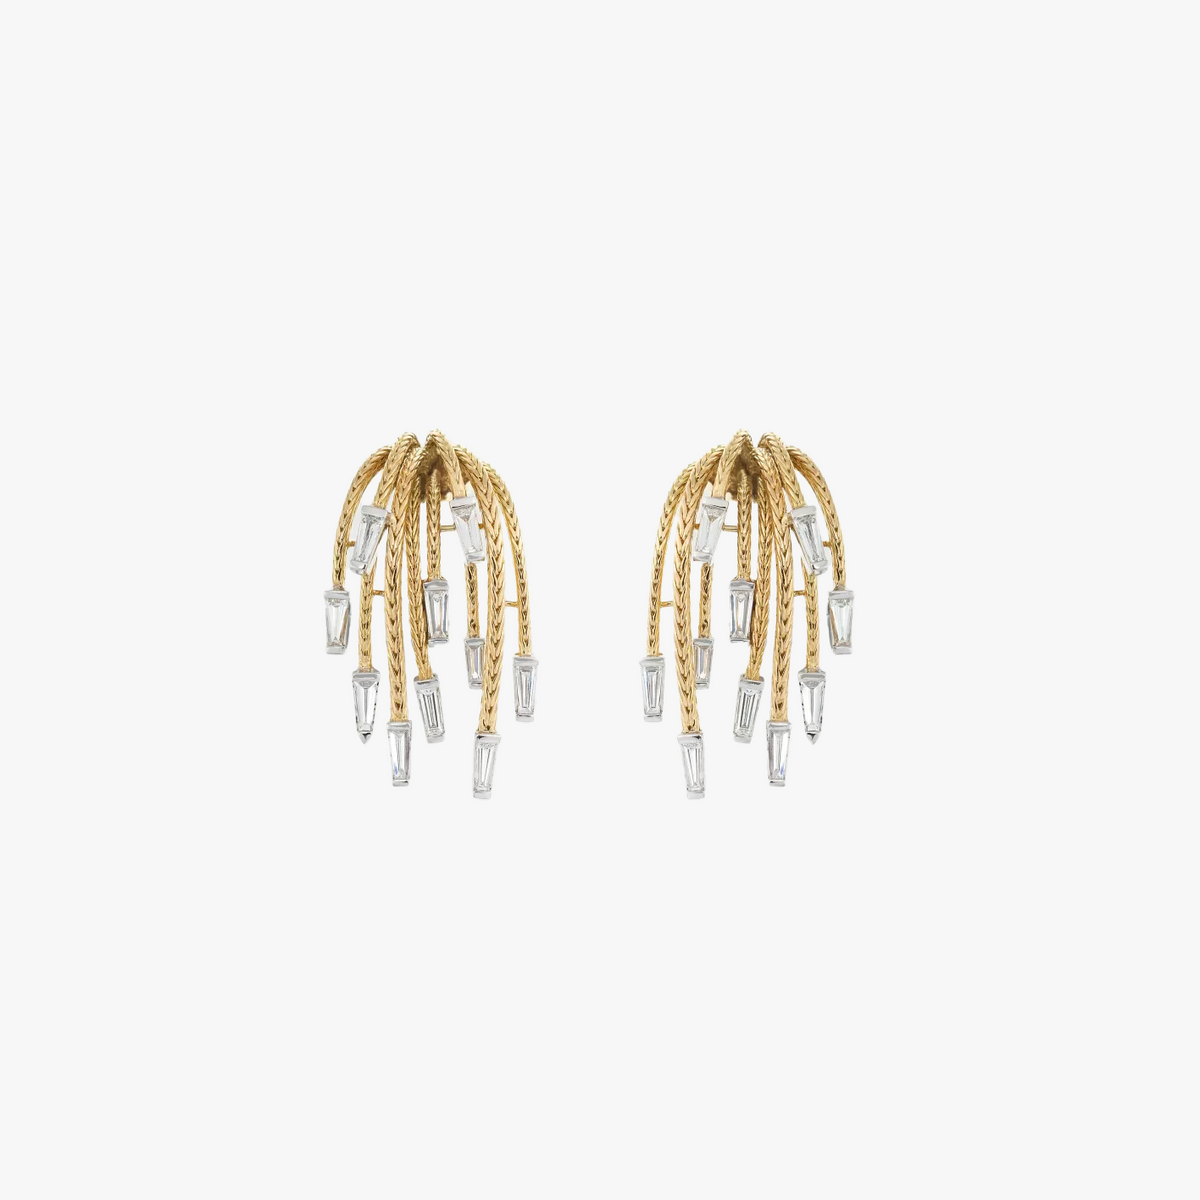 Yellow gold earrings with white diamond baguettes